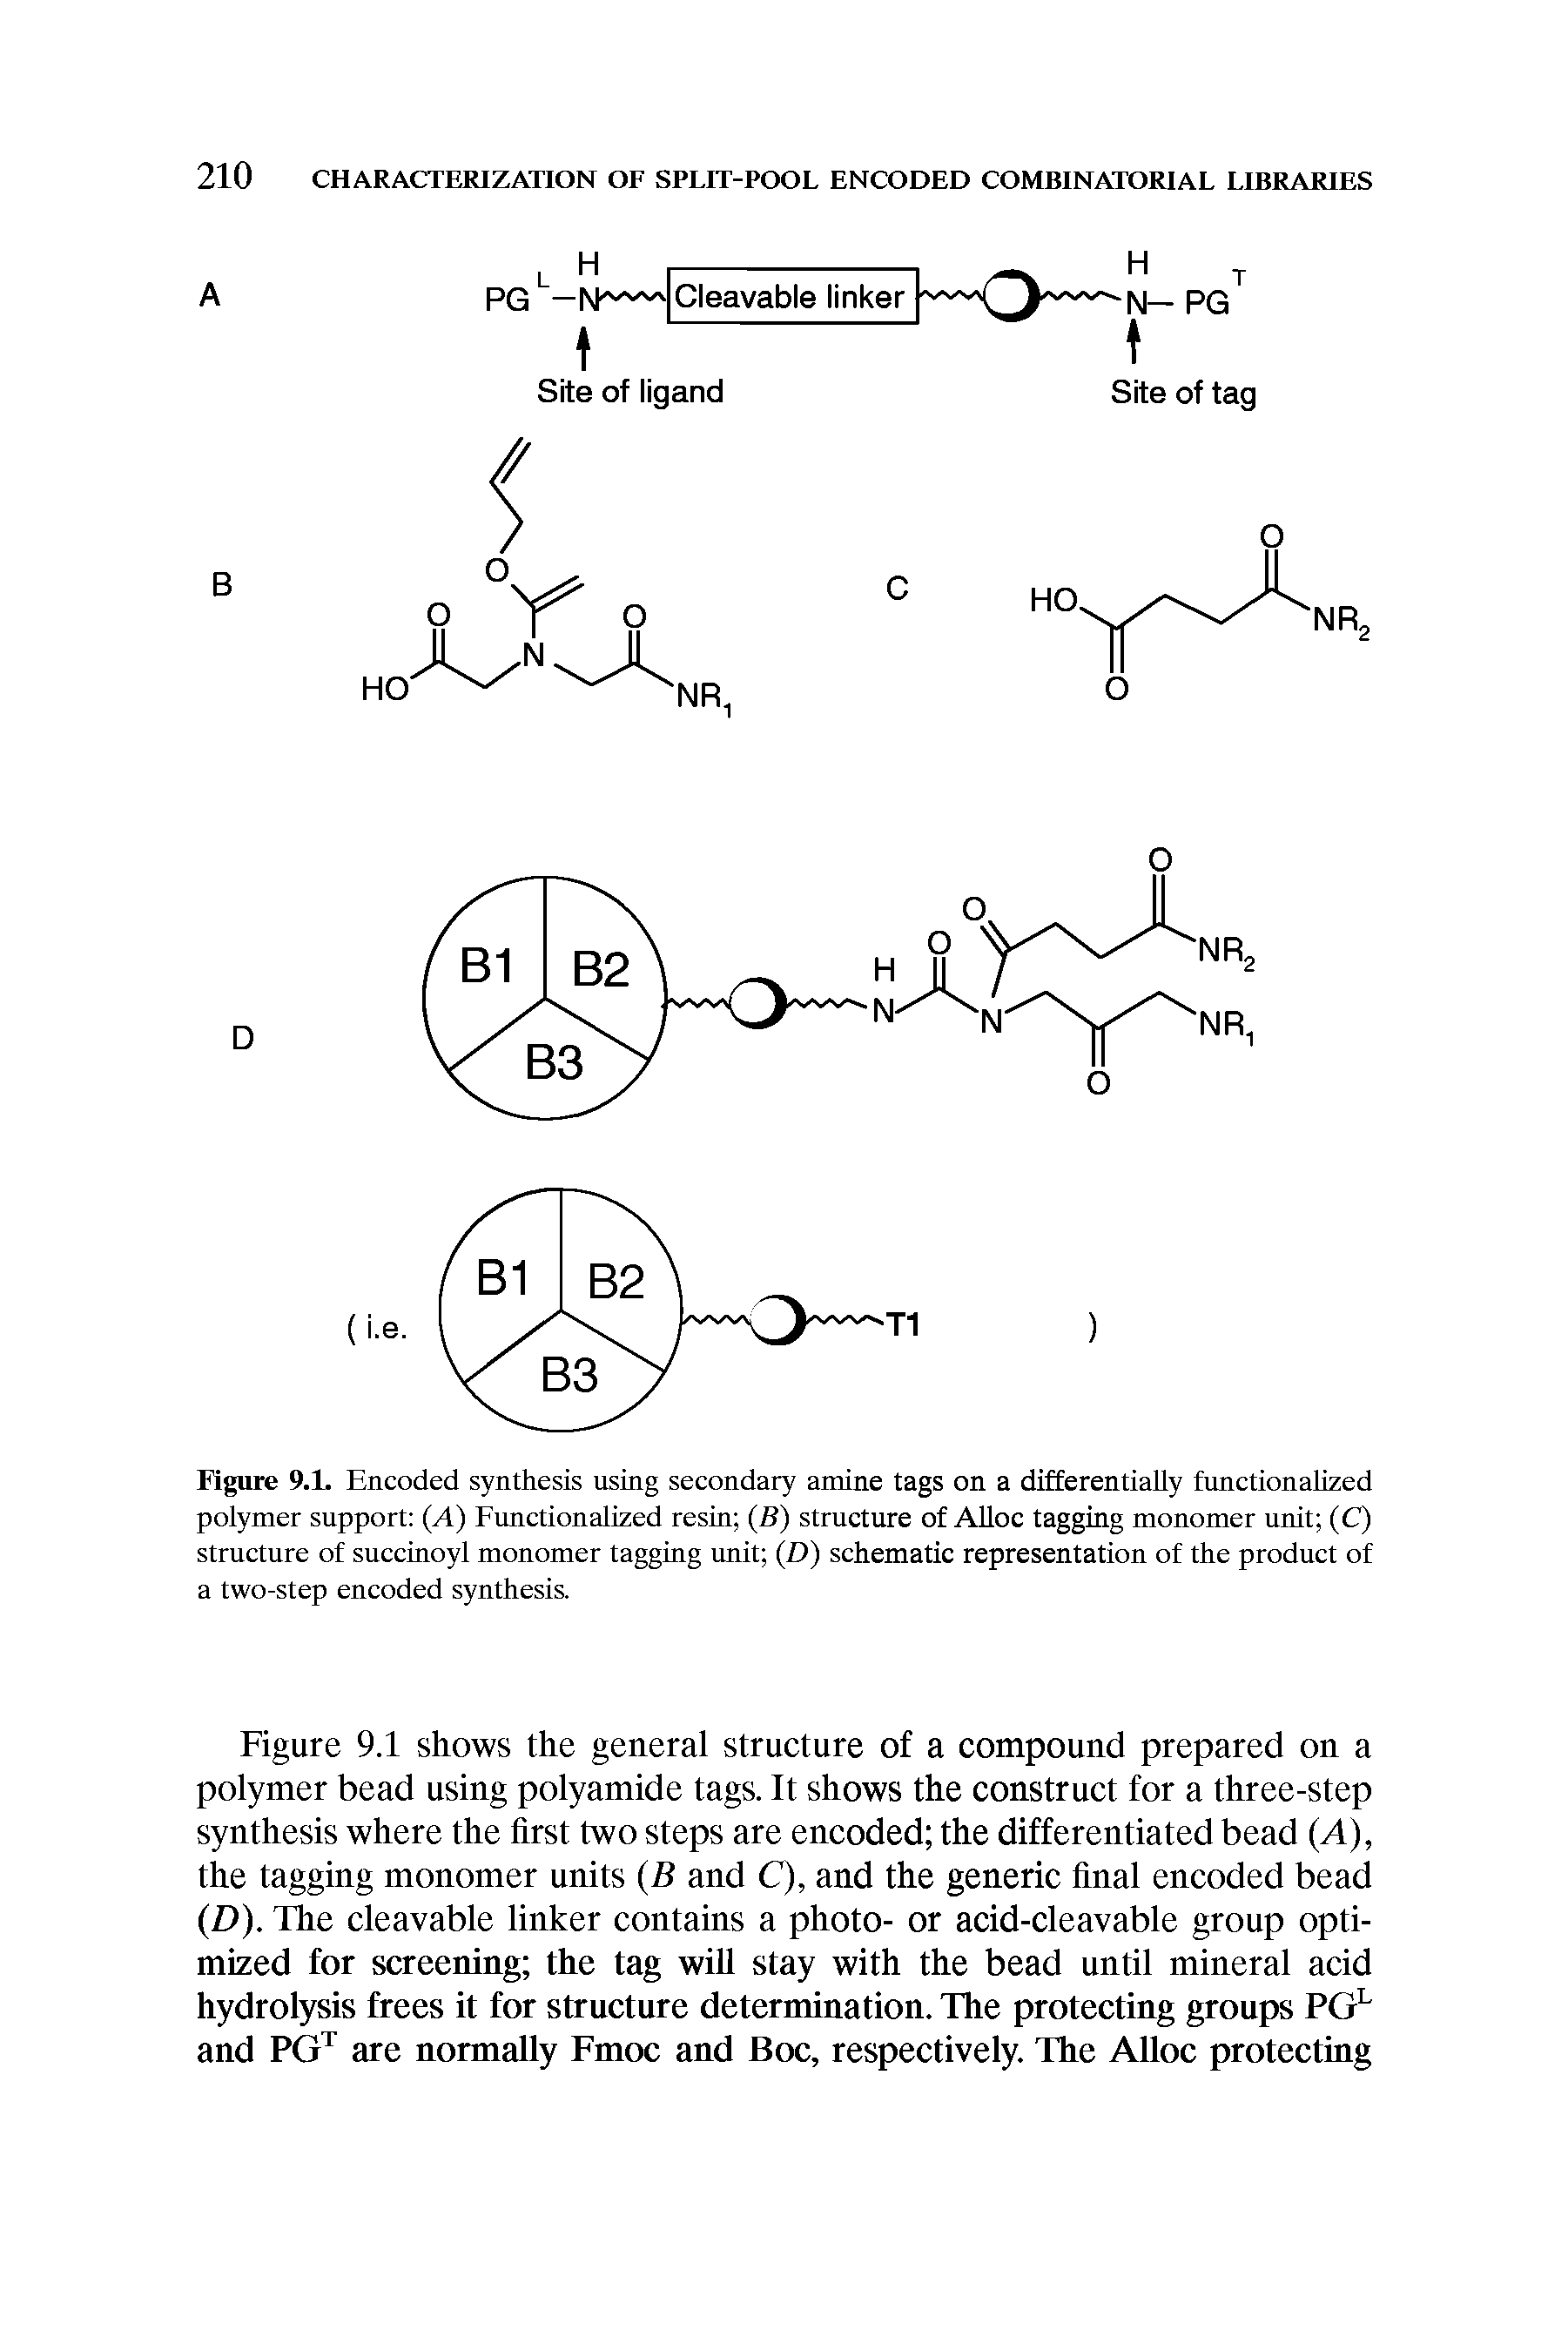 Figure 9.L Encoded synthesis using secondary amine tags on a differentially functionalized polymer support A) Functionalized resin (B) structure of AUoc tagging monomer unit (C) structure of succinoyl monomer tagging unit (D) schematic representation of the product of a two-step encoded synthesis.